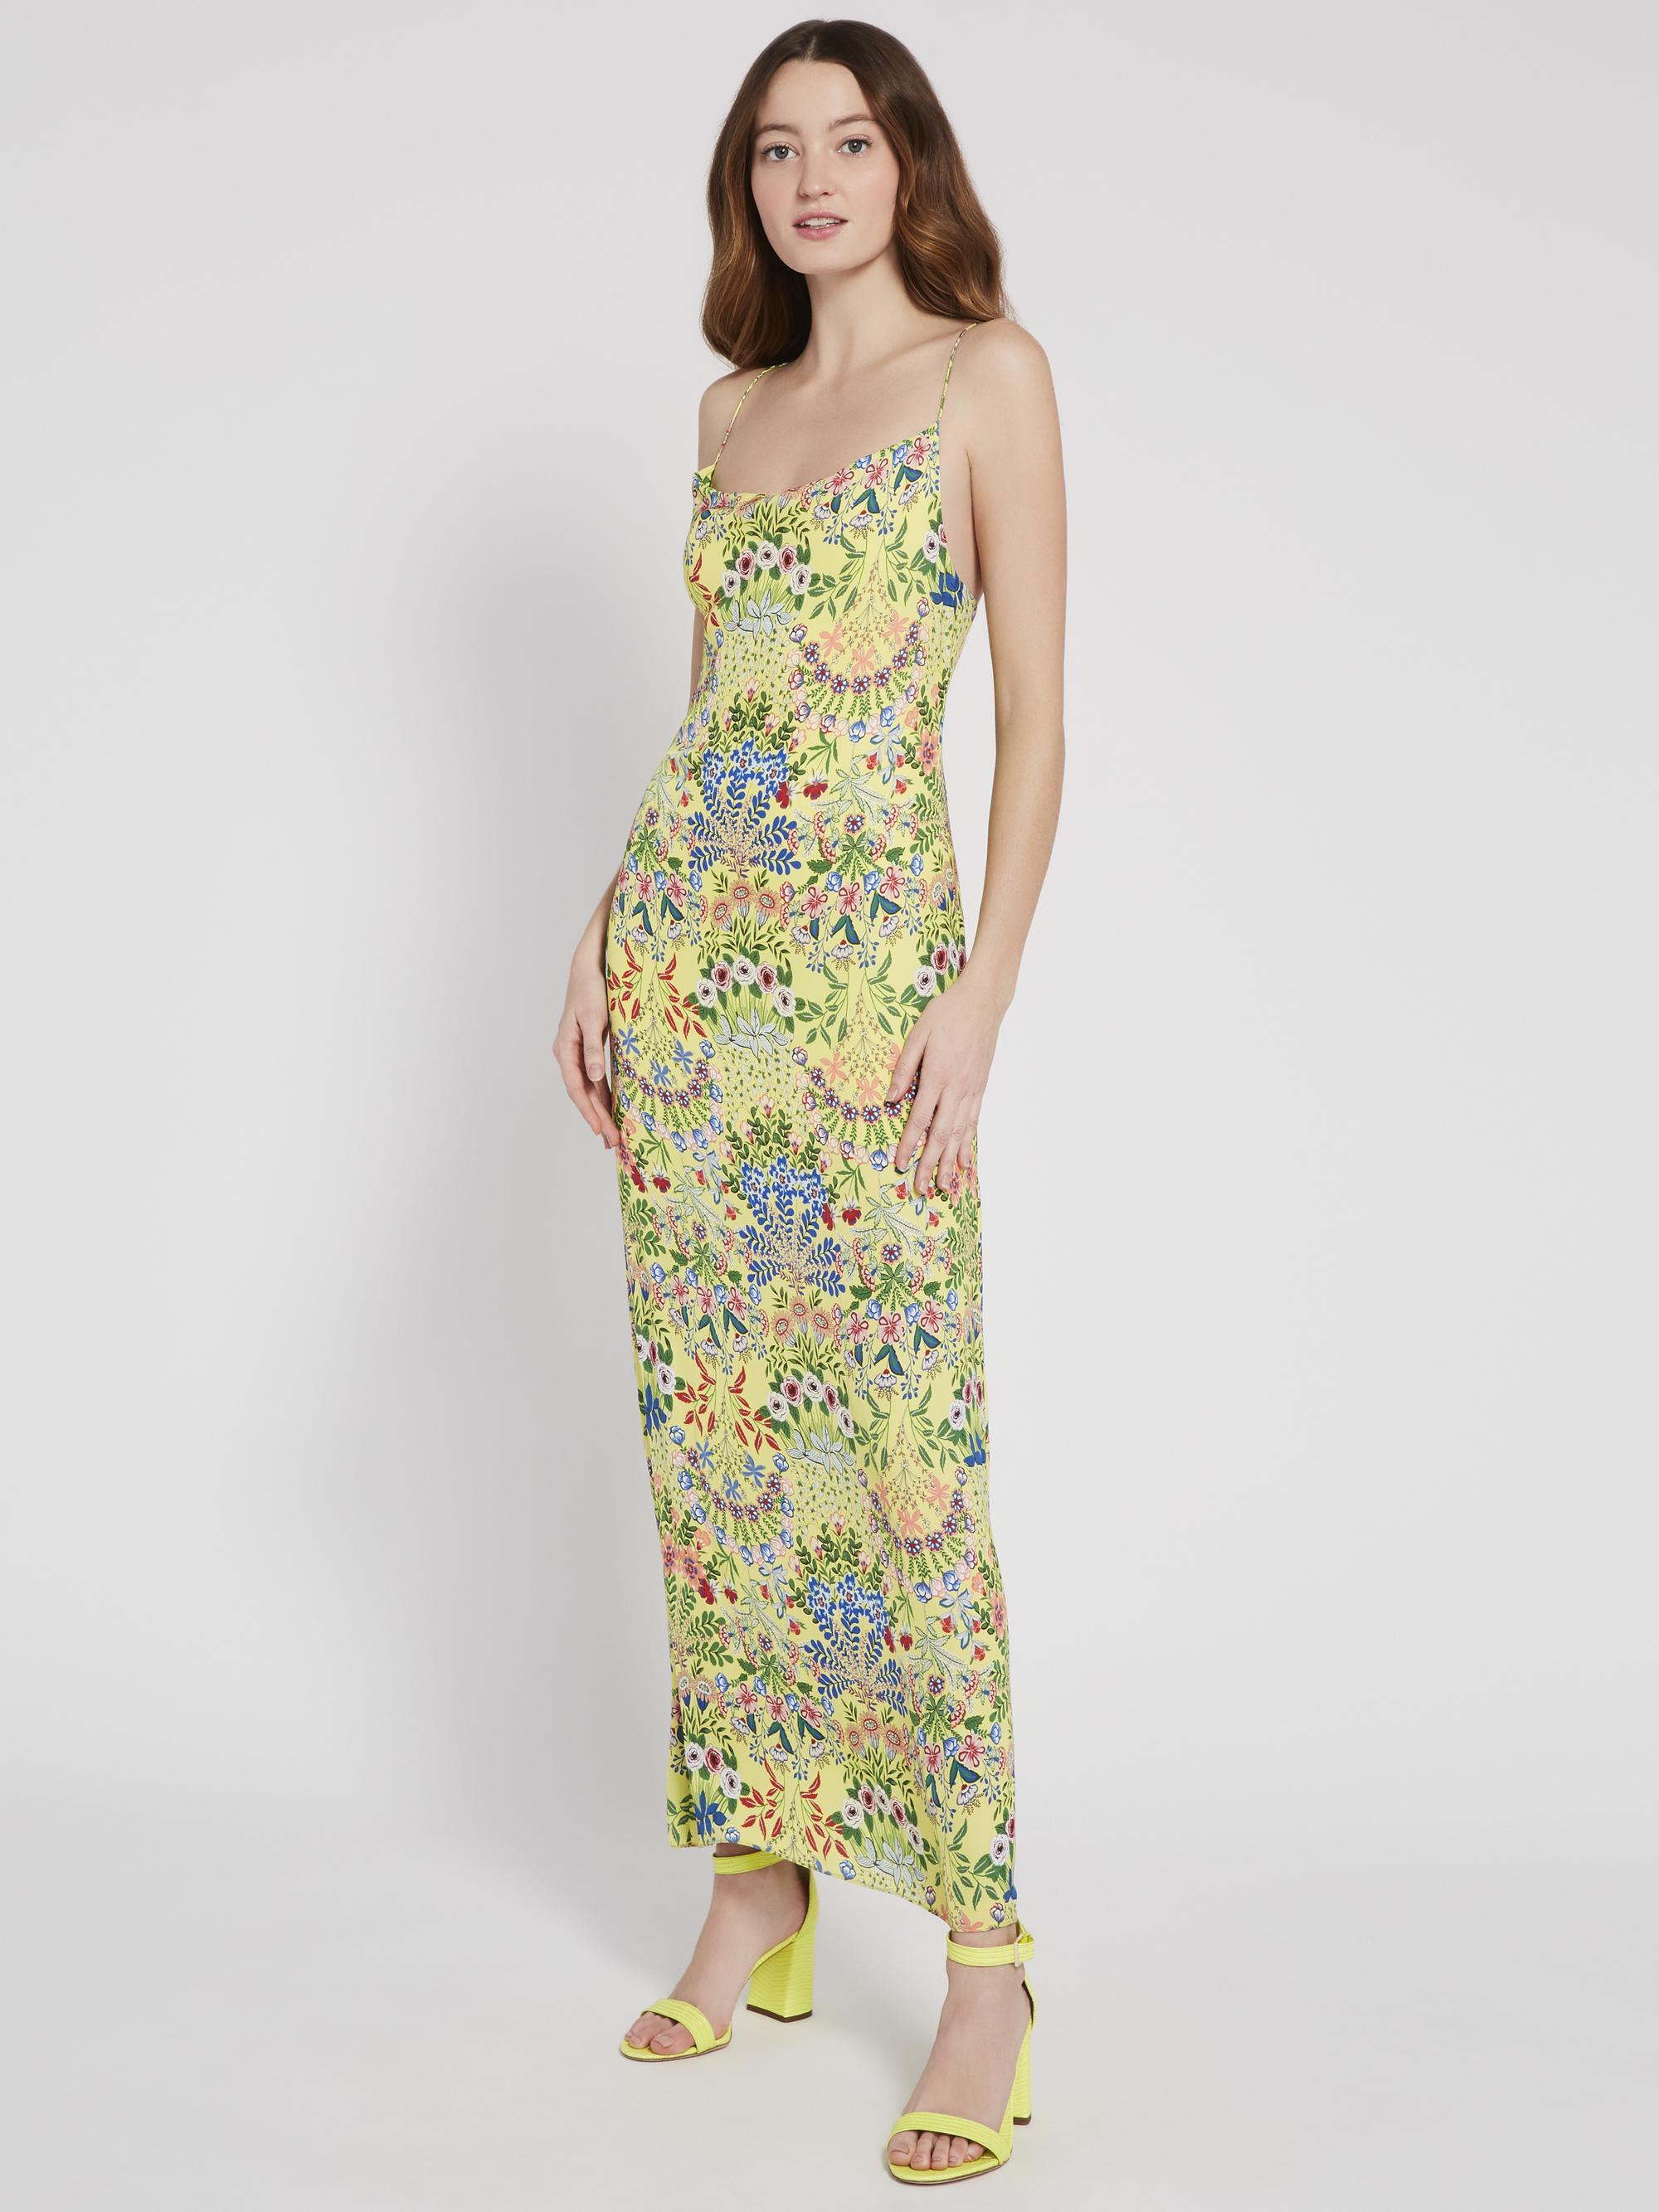 Alice + Olivia Synthetic Harmony Floral Maxi Dress in Yellow - Lyst